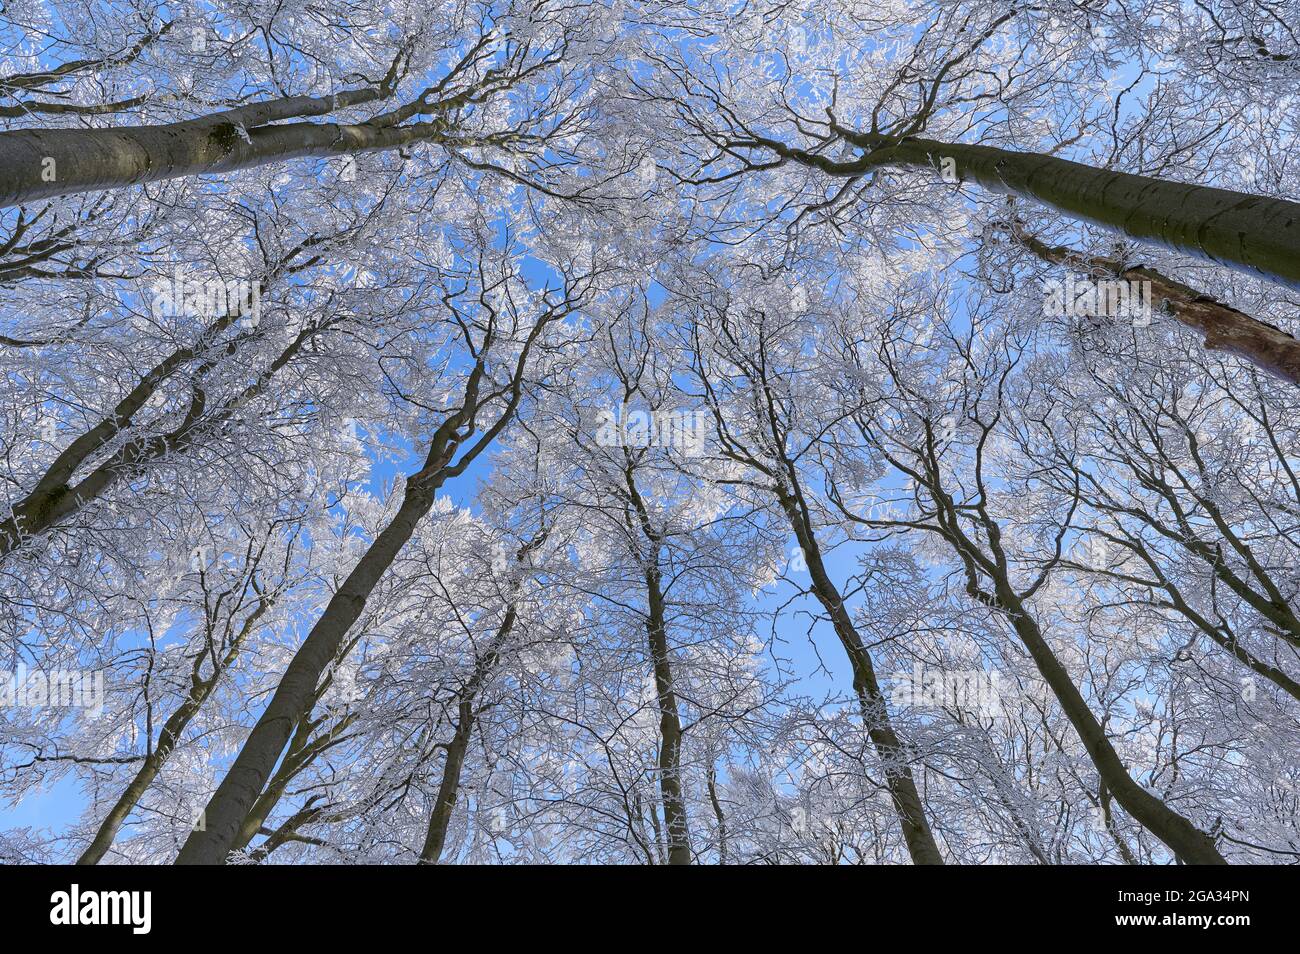 View to the frosty treetops and blue sky in a beech forest in winter, Wasserkuppe mountain, Rhon Mountains; Gersfeld, Hesse, Germany Stock Photo